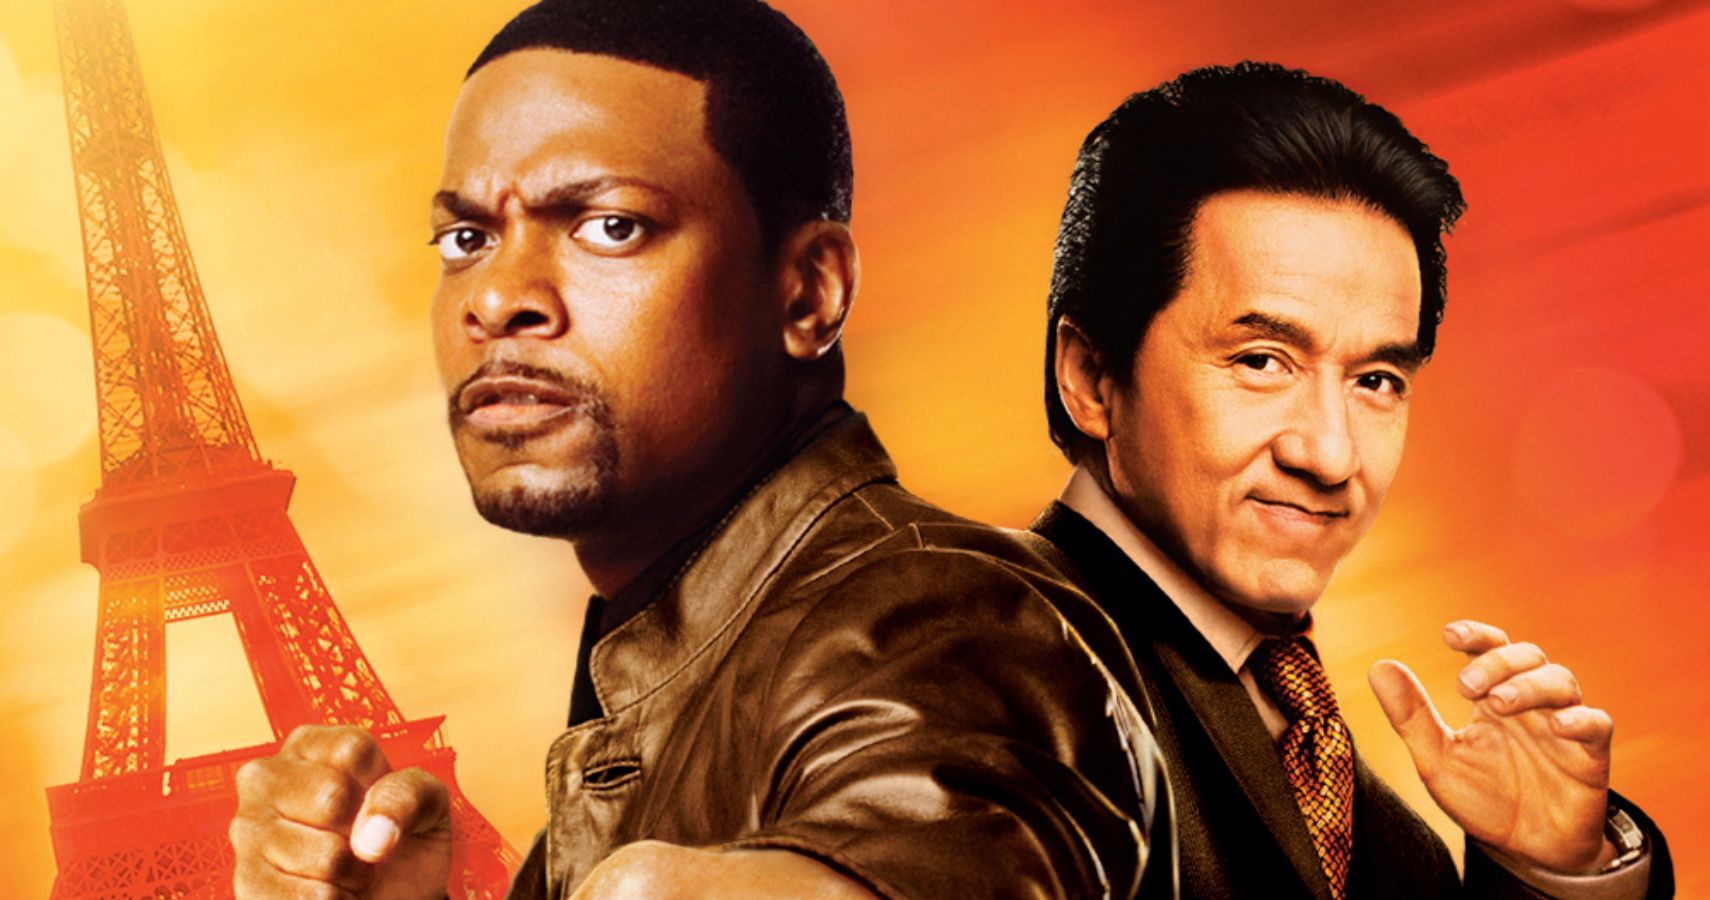 Rush Hour Ranking All The Villains In The Franchise By Intelligence